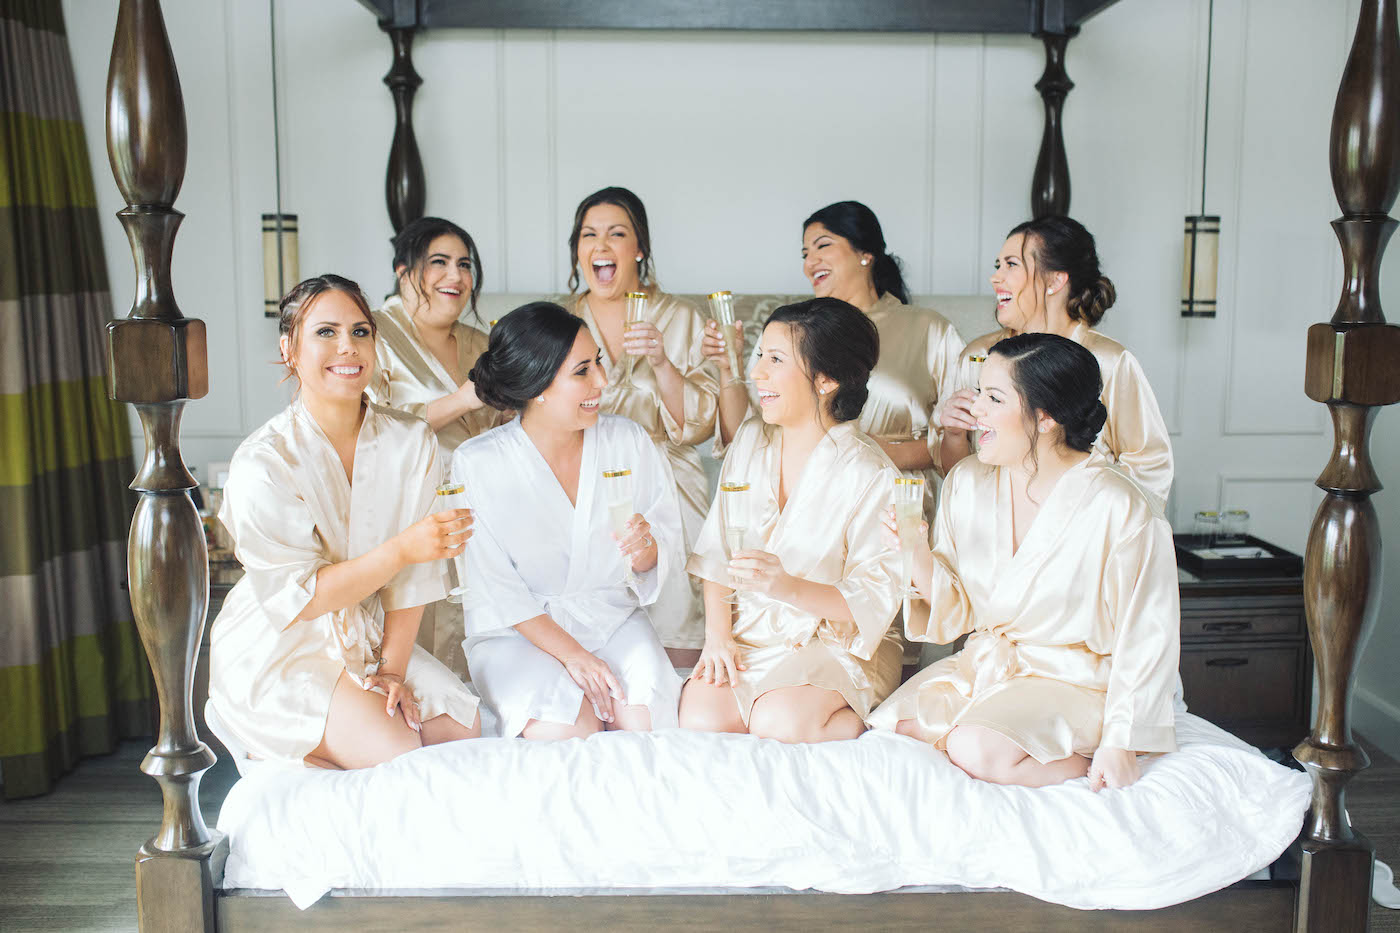 Downtown St. Petersburg Bride and Bridesmaids Getting Ready Group Photo, Bridesmaids in Matching Gold Silk Robes Toasting Champagne | Florida Boutique Hotel and Wedding Venue The Birchwood